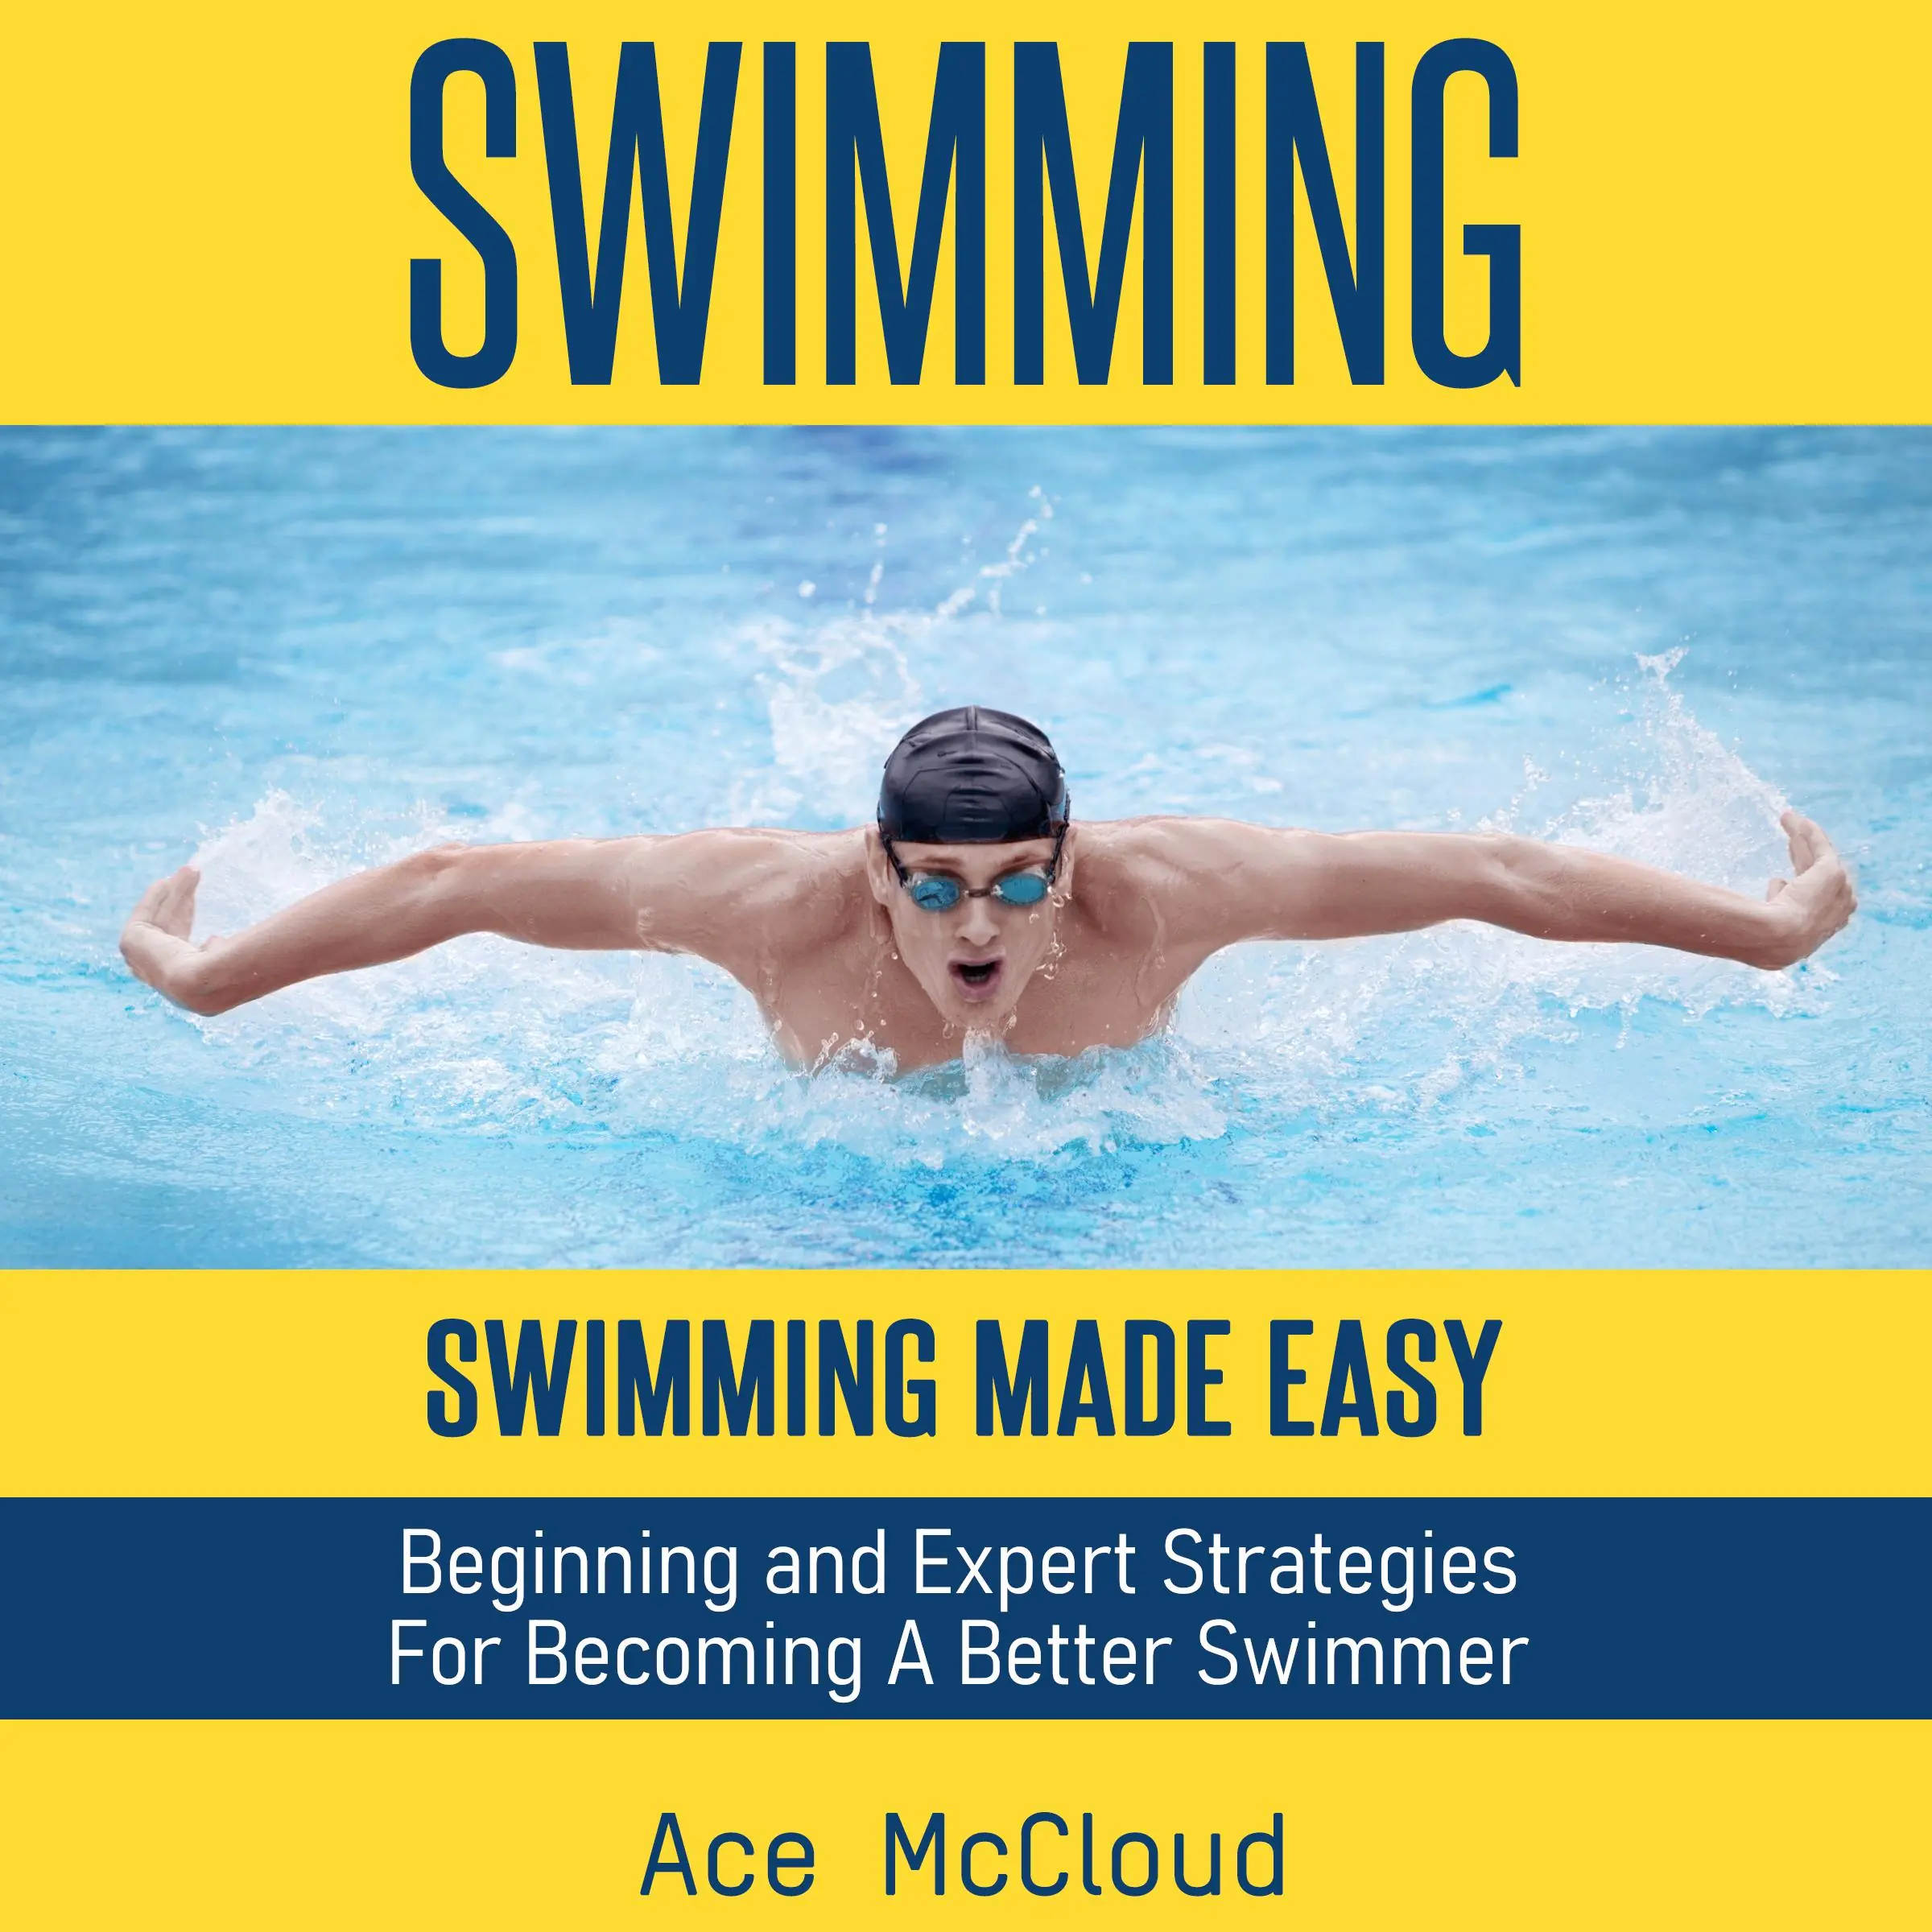 Swimming: Swimming Made Easy: Beginning and Expert Strategies For Becoming A Better Swimmer Audiobook by Ace McCloud